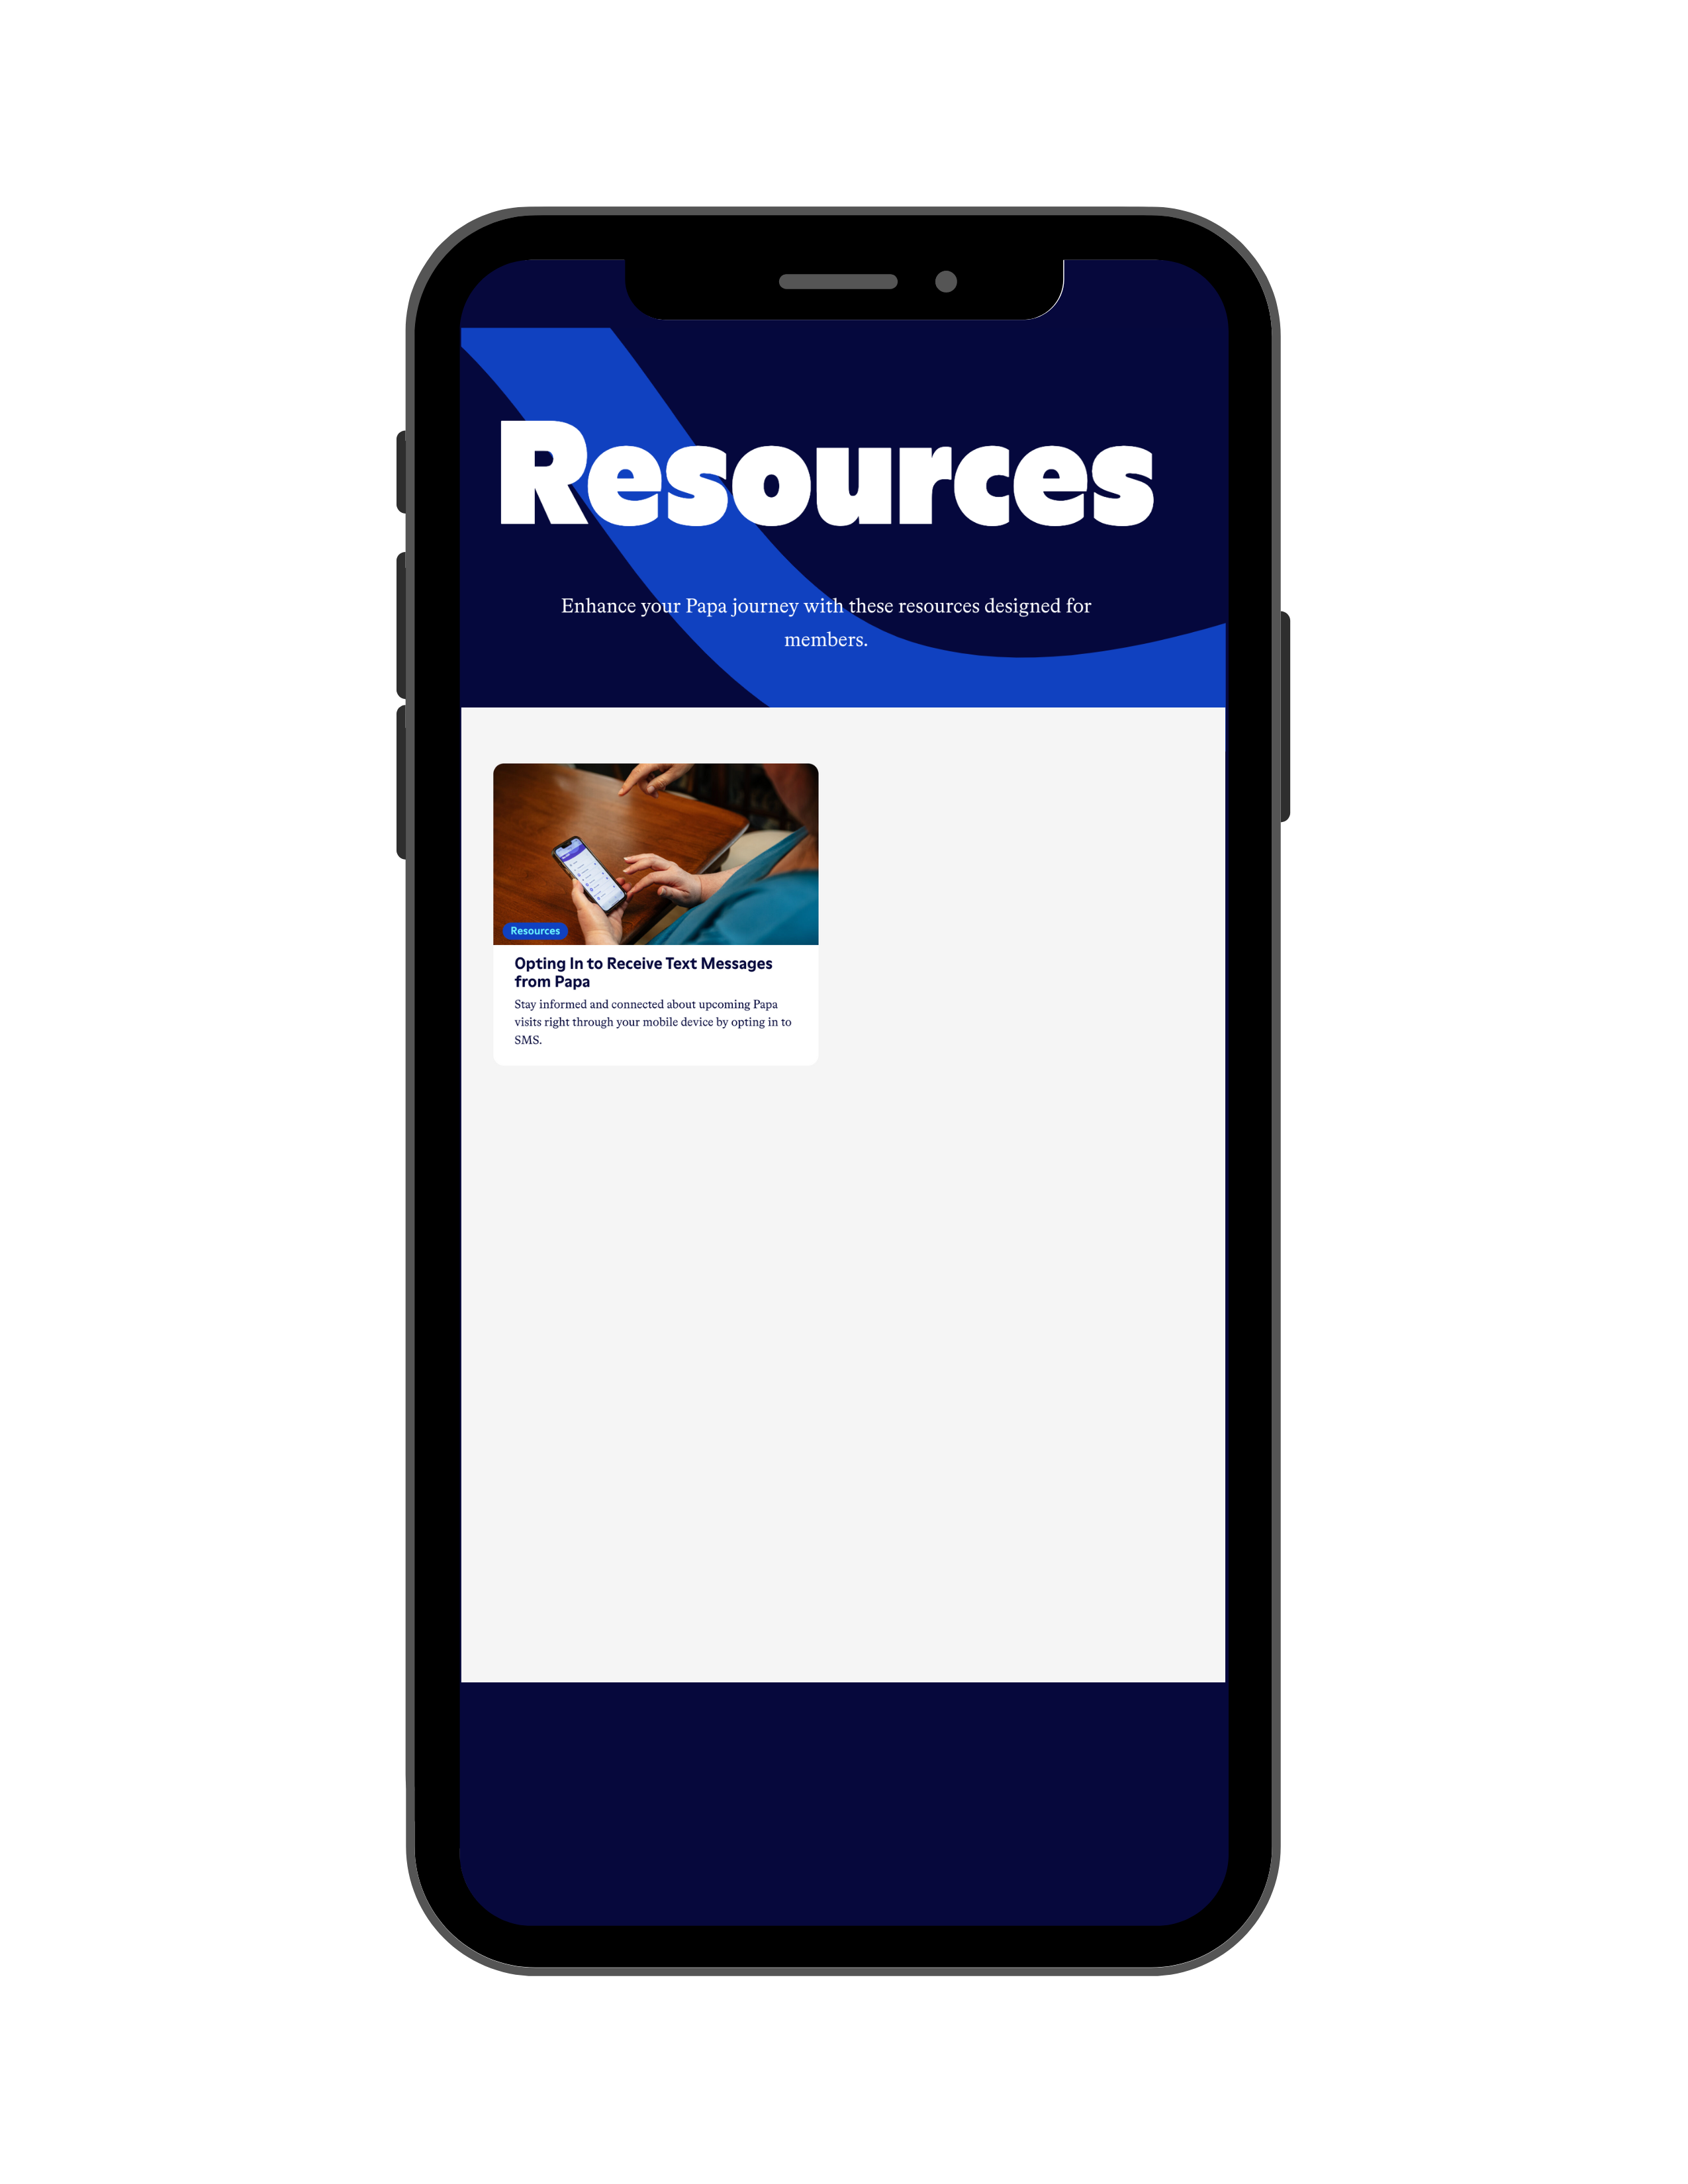 Papa member resources displayed on a mobile device.